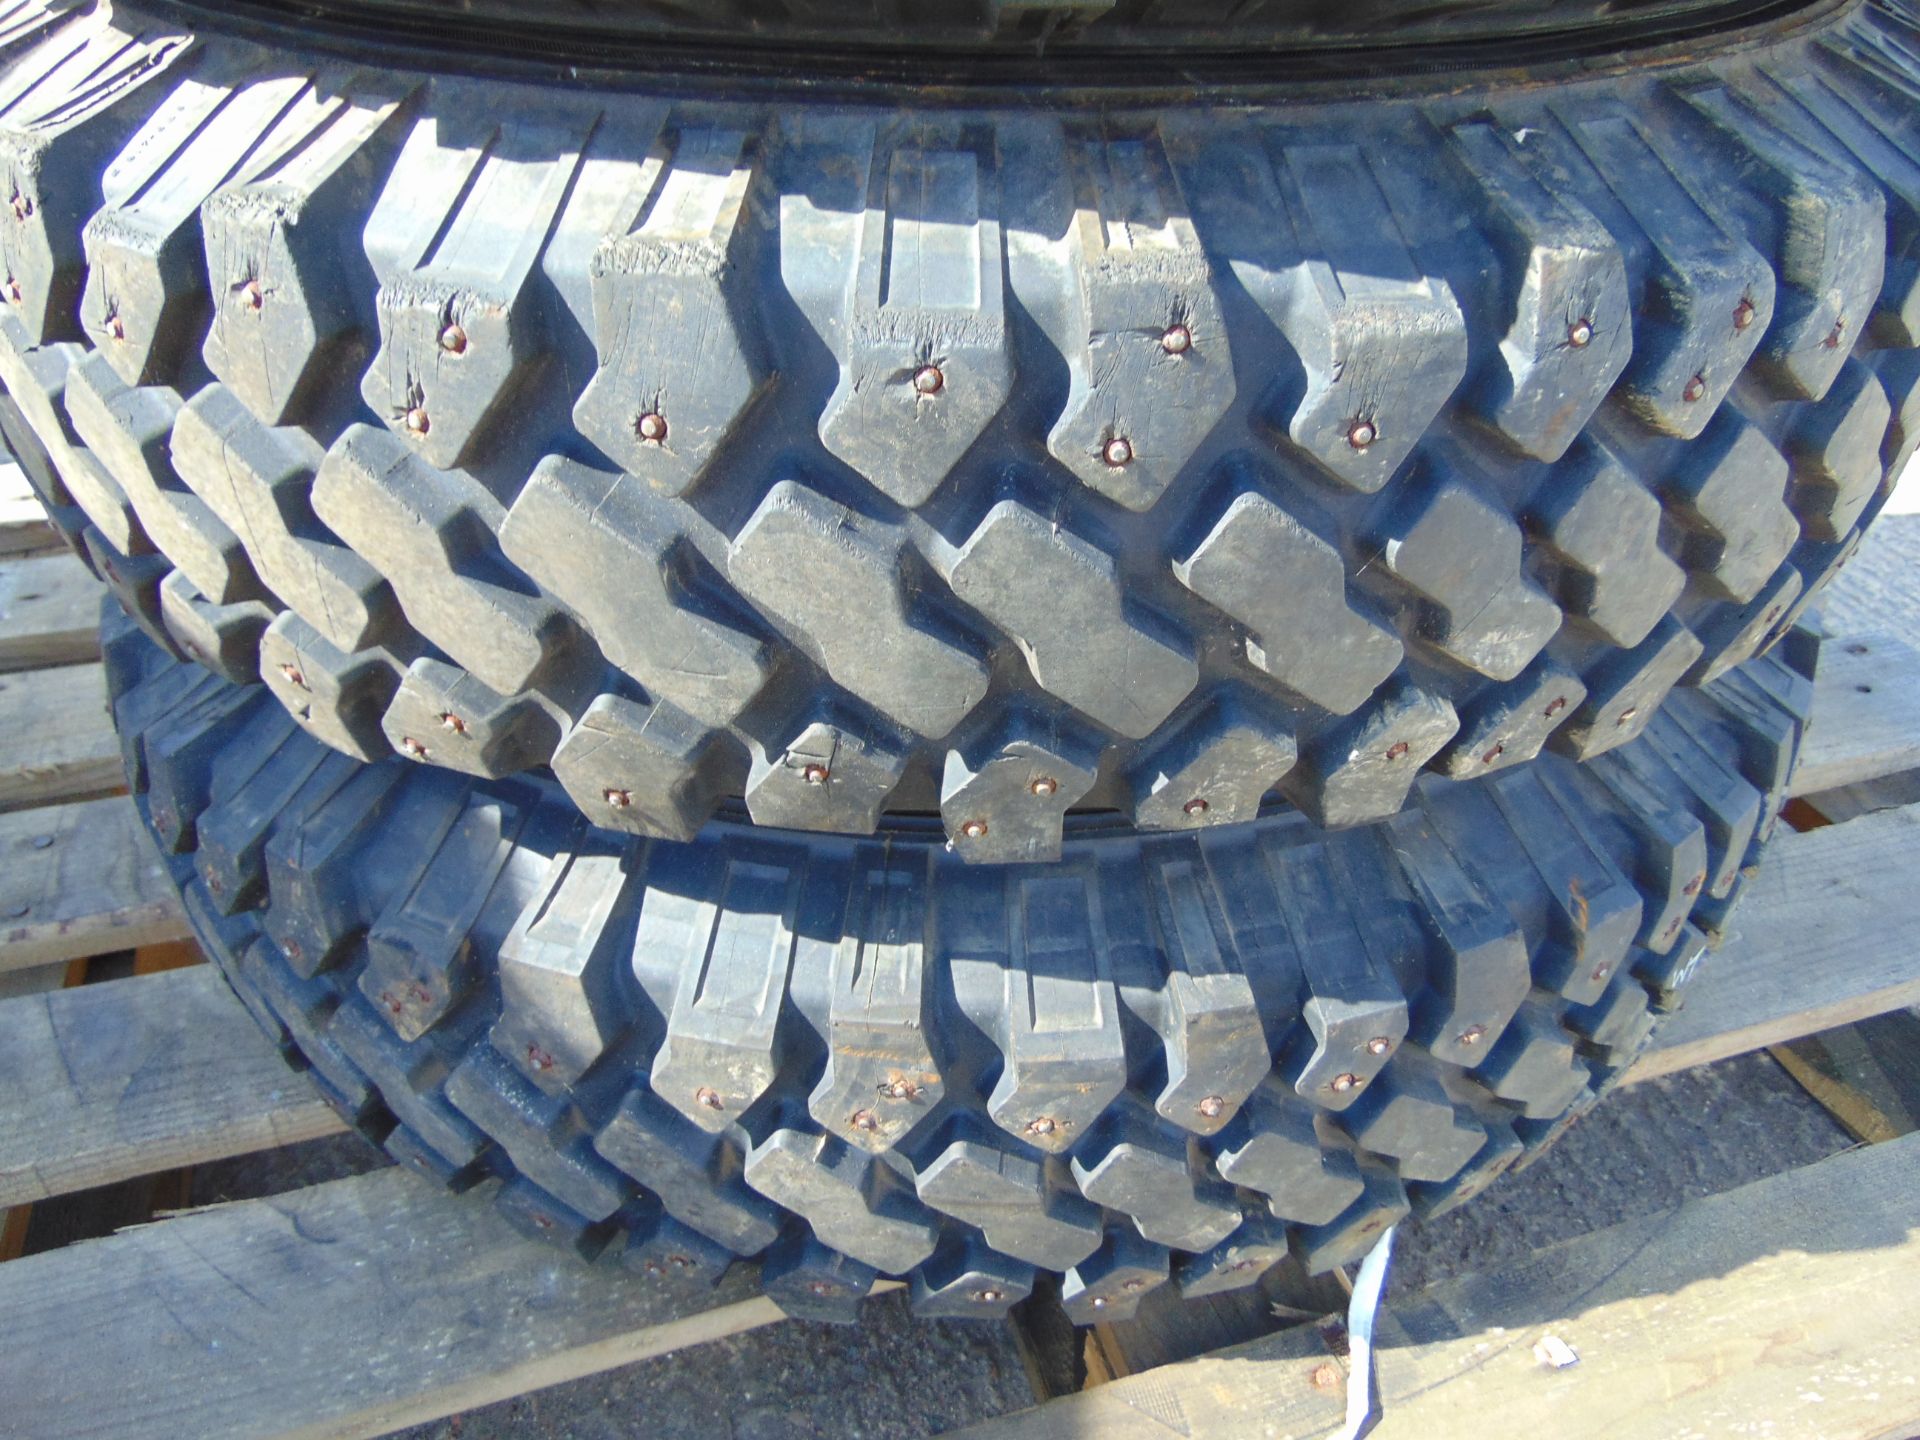 4 x Michelin XZL 7.50 R16 Tyres with 5 Stud Rims - Image 7 of 7